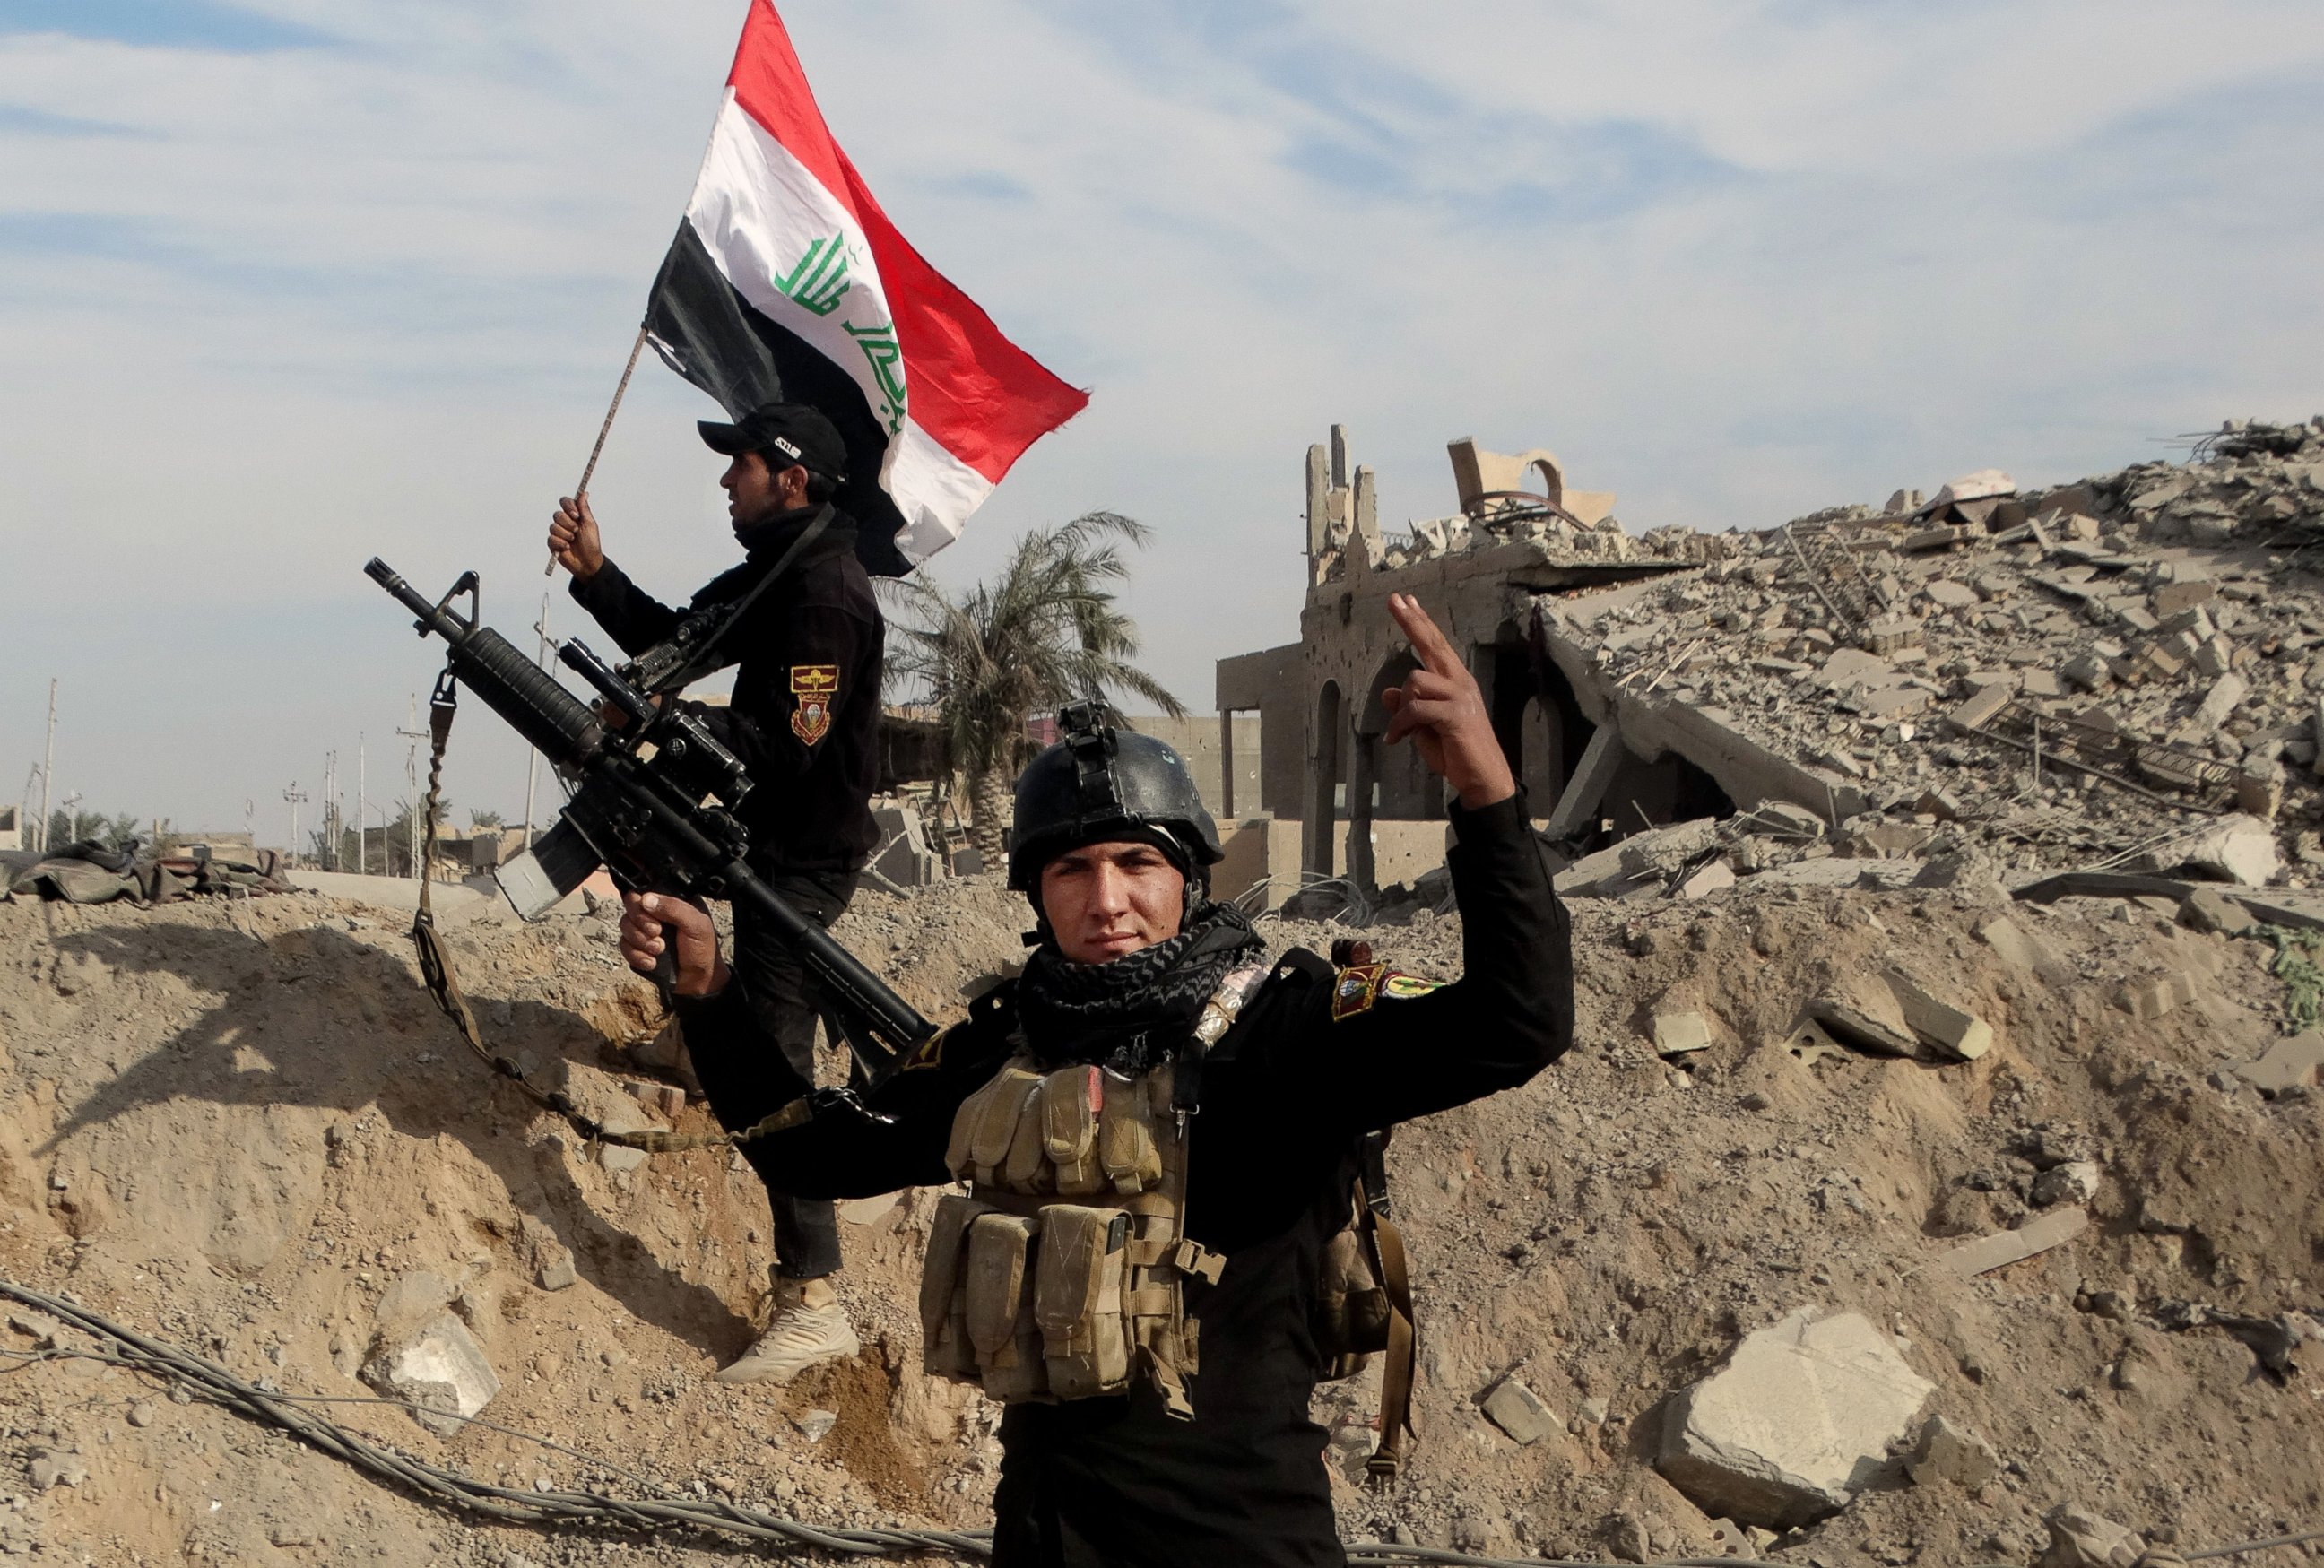 Iraqi security forces raise an Iraqi flag near the provincial council building in central Ramadi.